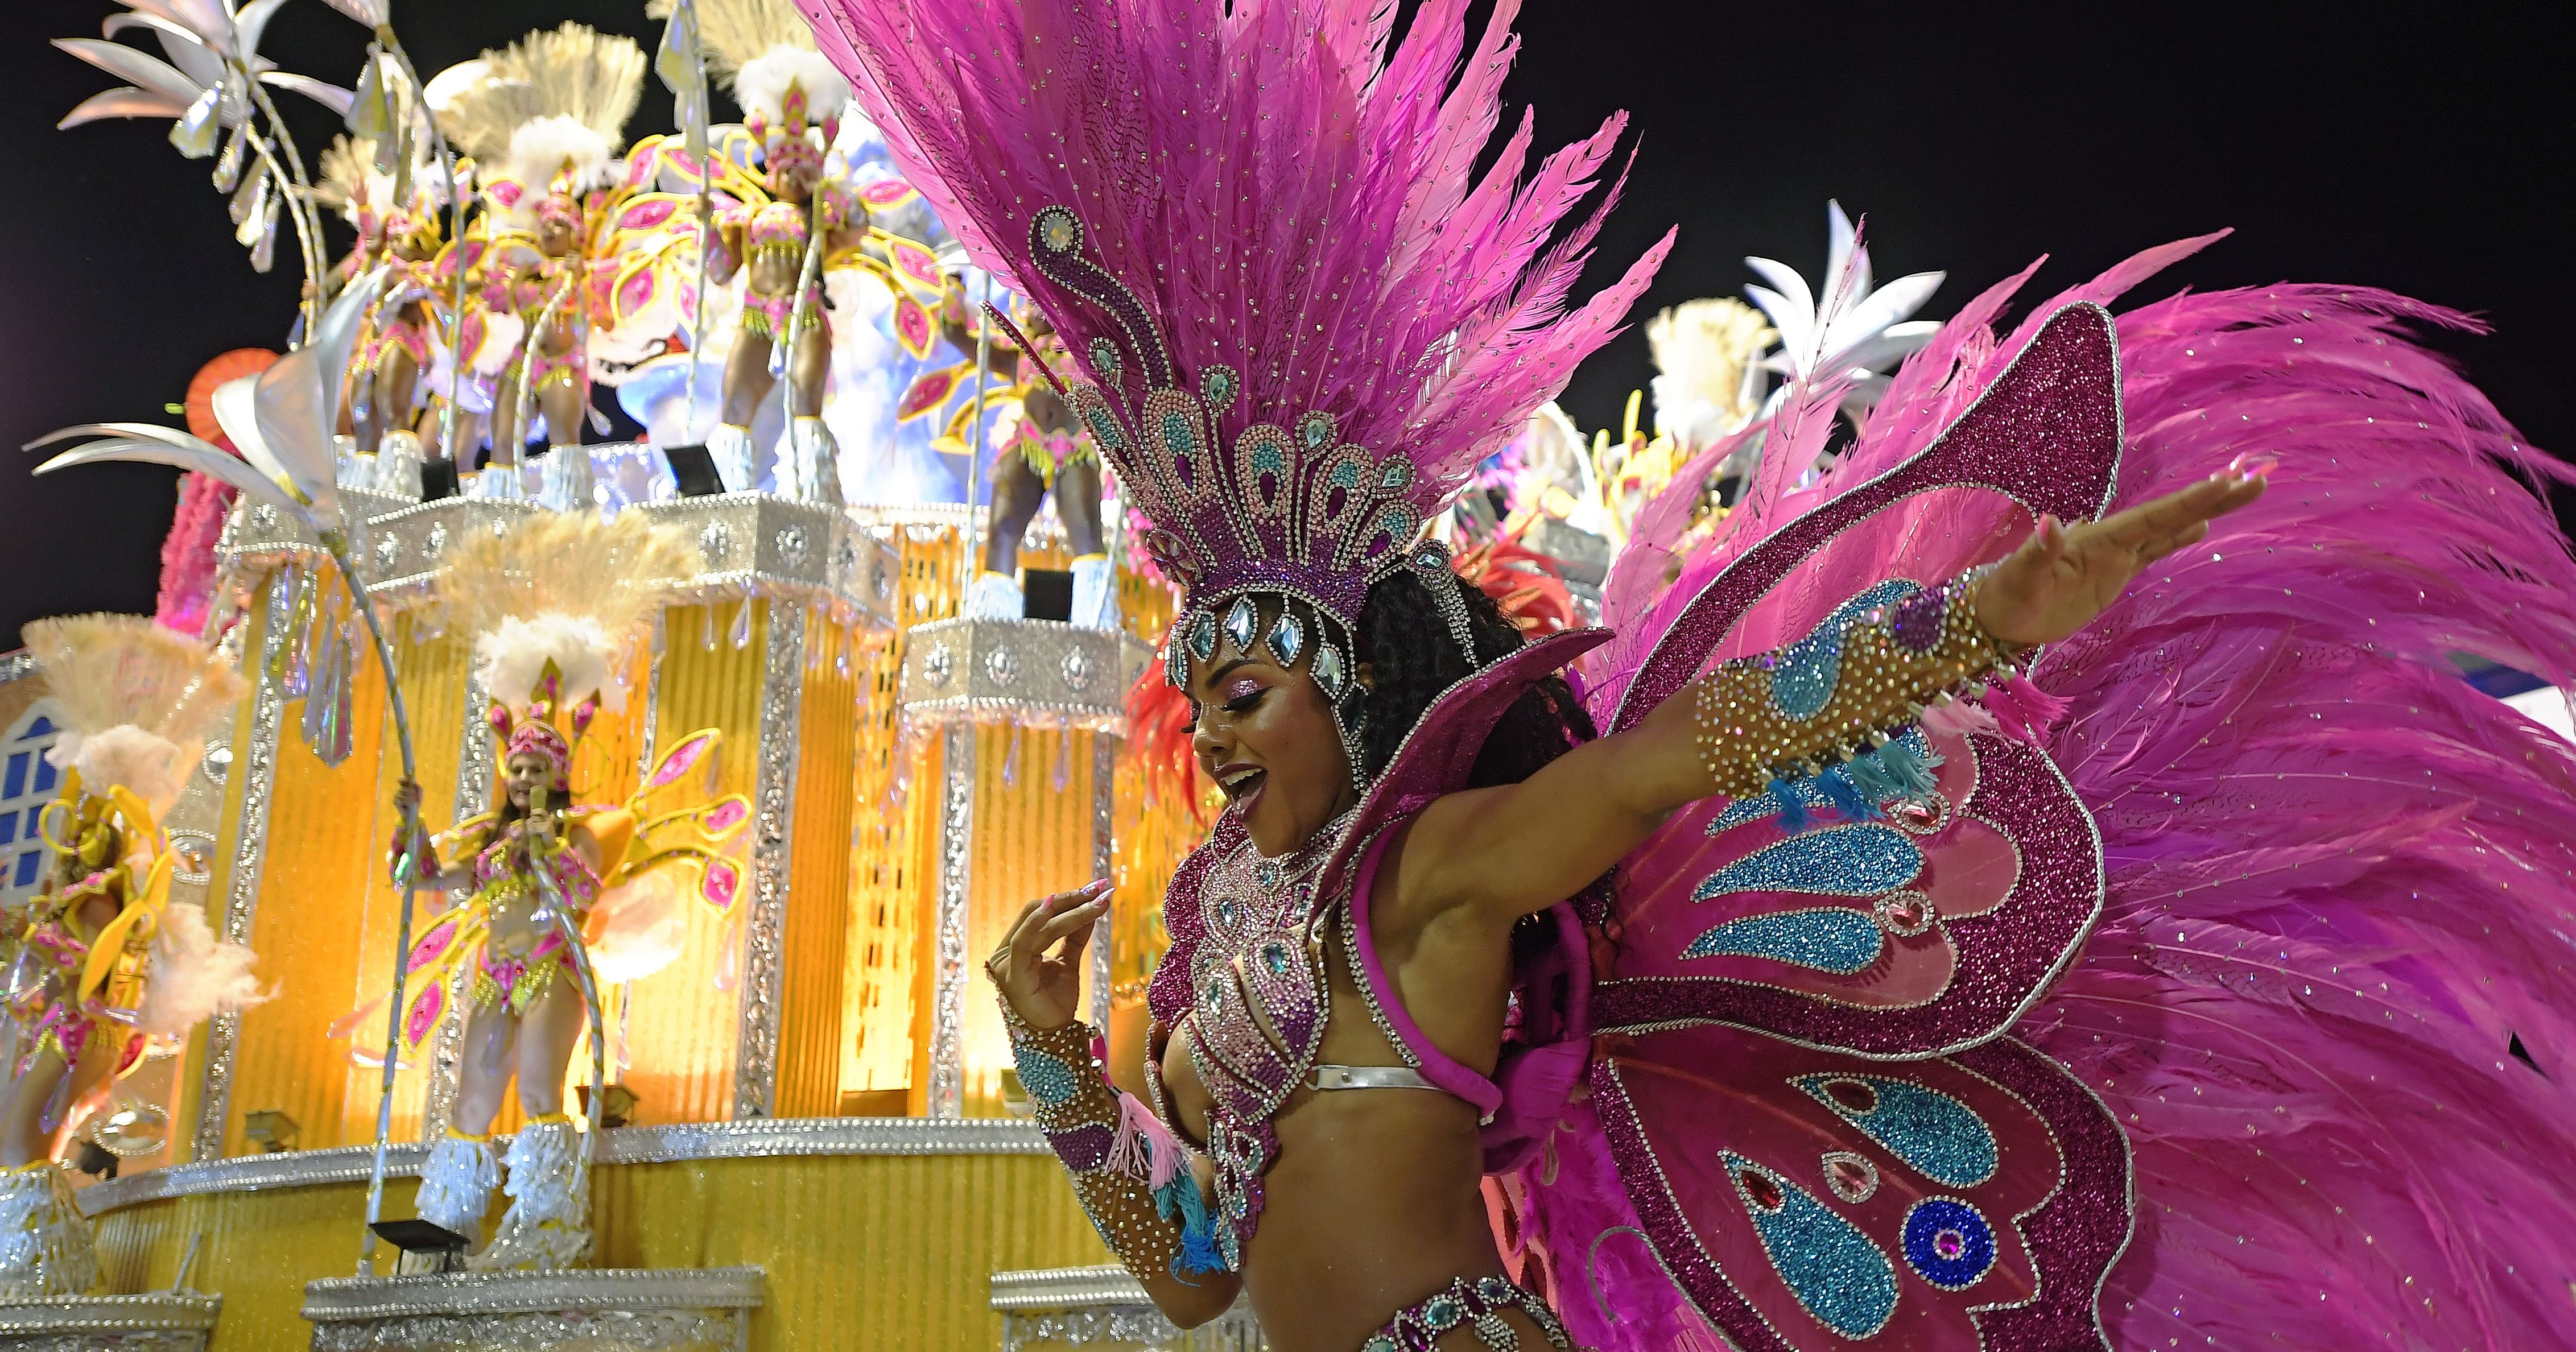 Things to Know About Rio de Janeiro's Carnival